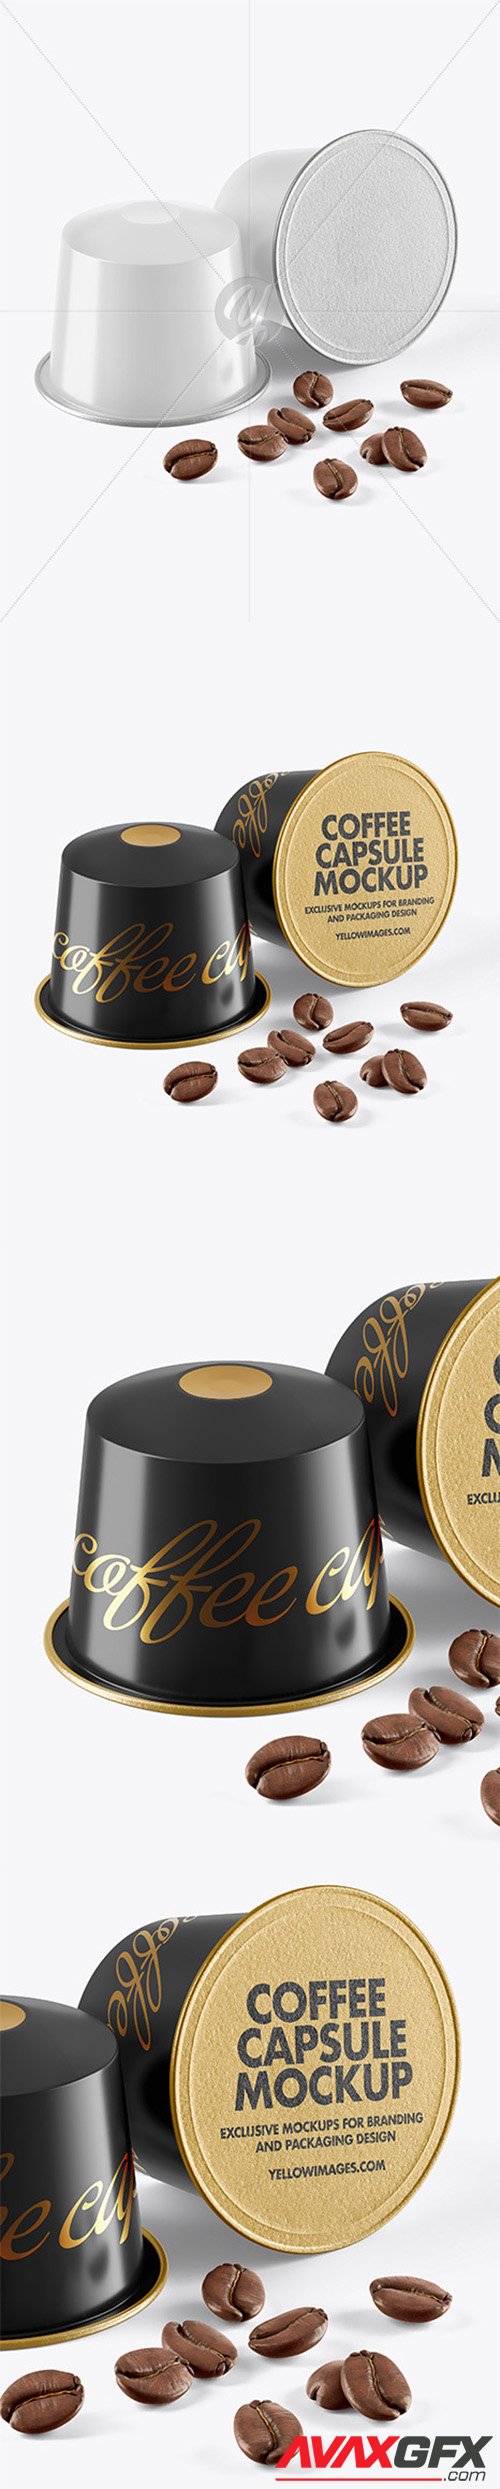 Download Paper Box W Coffee Capsules Mockup 58321 Avaxgfx All Downloads That You Need In One Place Graphic From Nitroflare Rapidgator Yellowimages Mockups